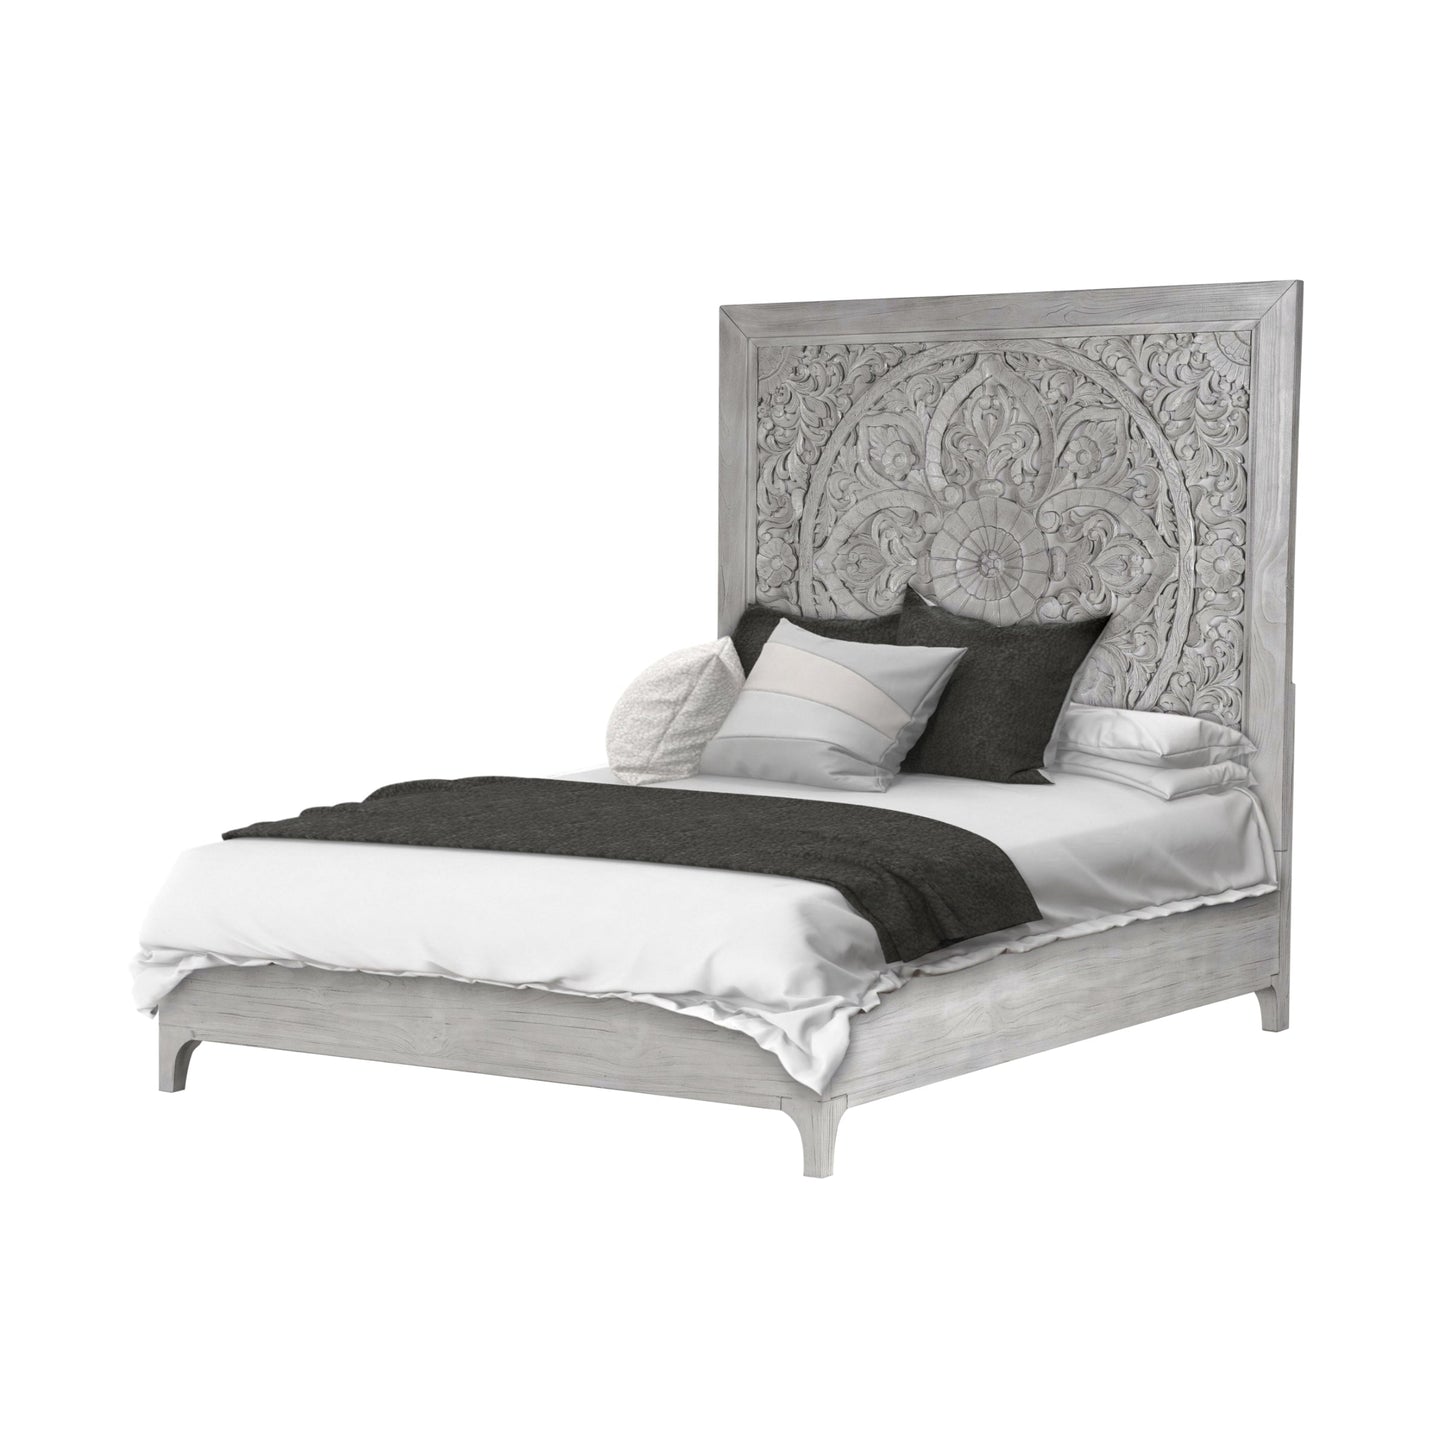 Modus Boho Chic 4PC Queen Bedroom Set in Washed White